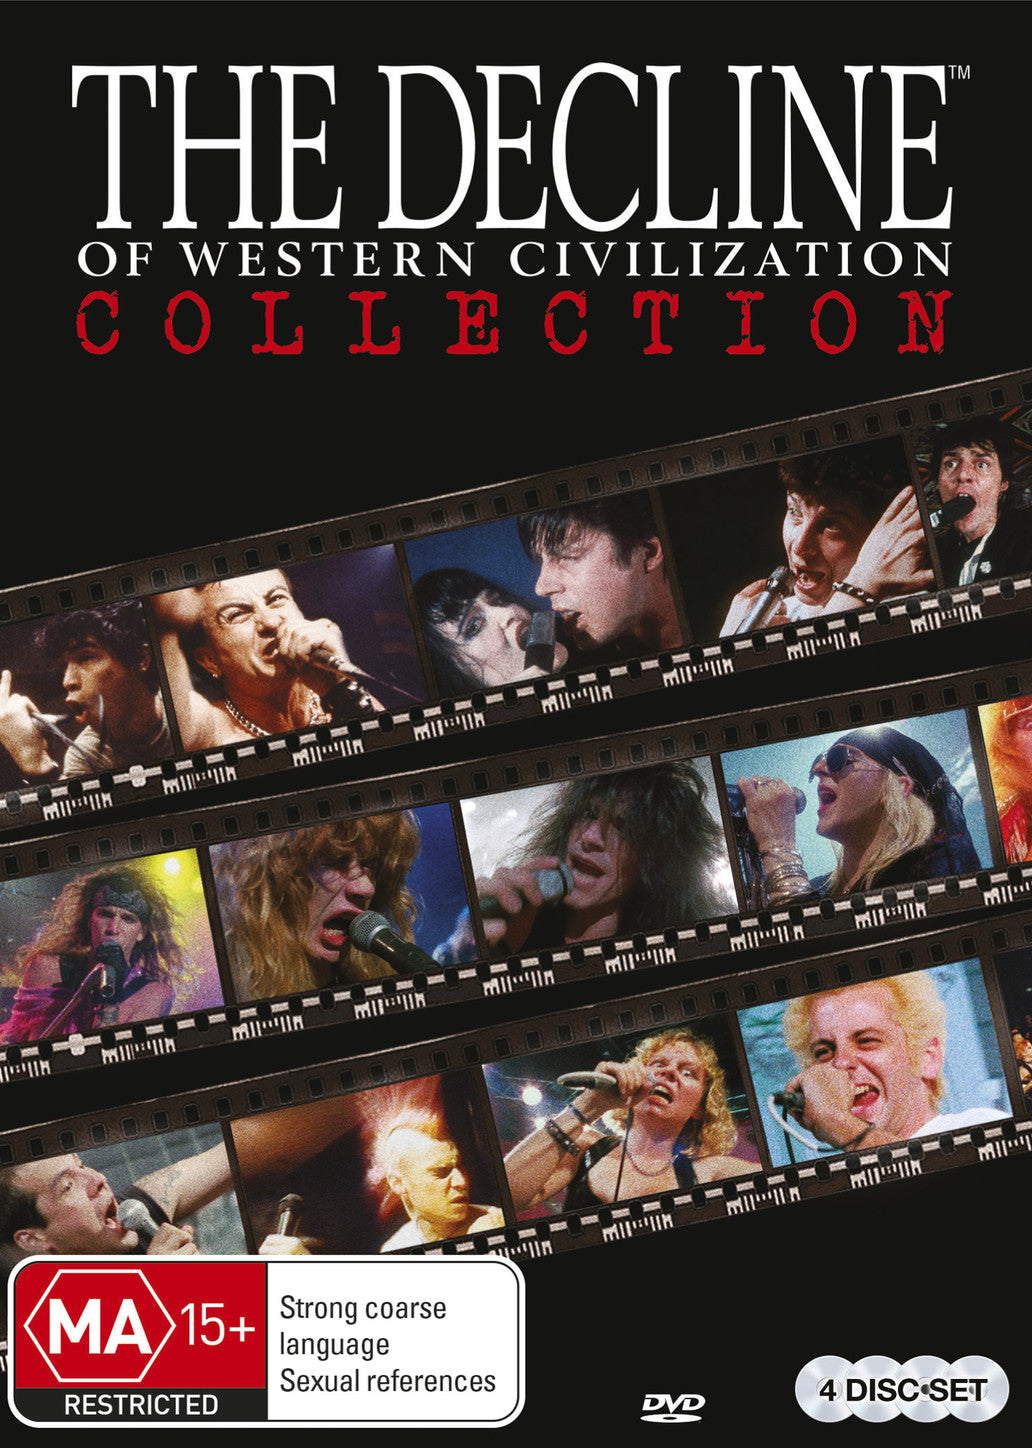 THE DECLINE OF WESTERN CIVILIZATION DVD COLLECTION